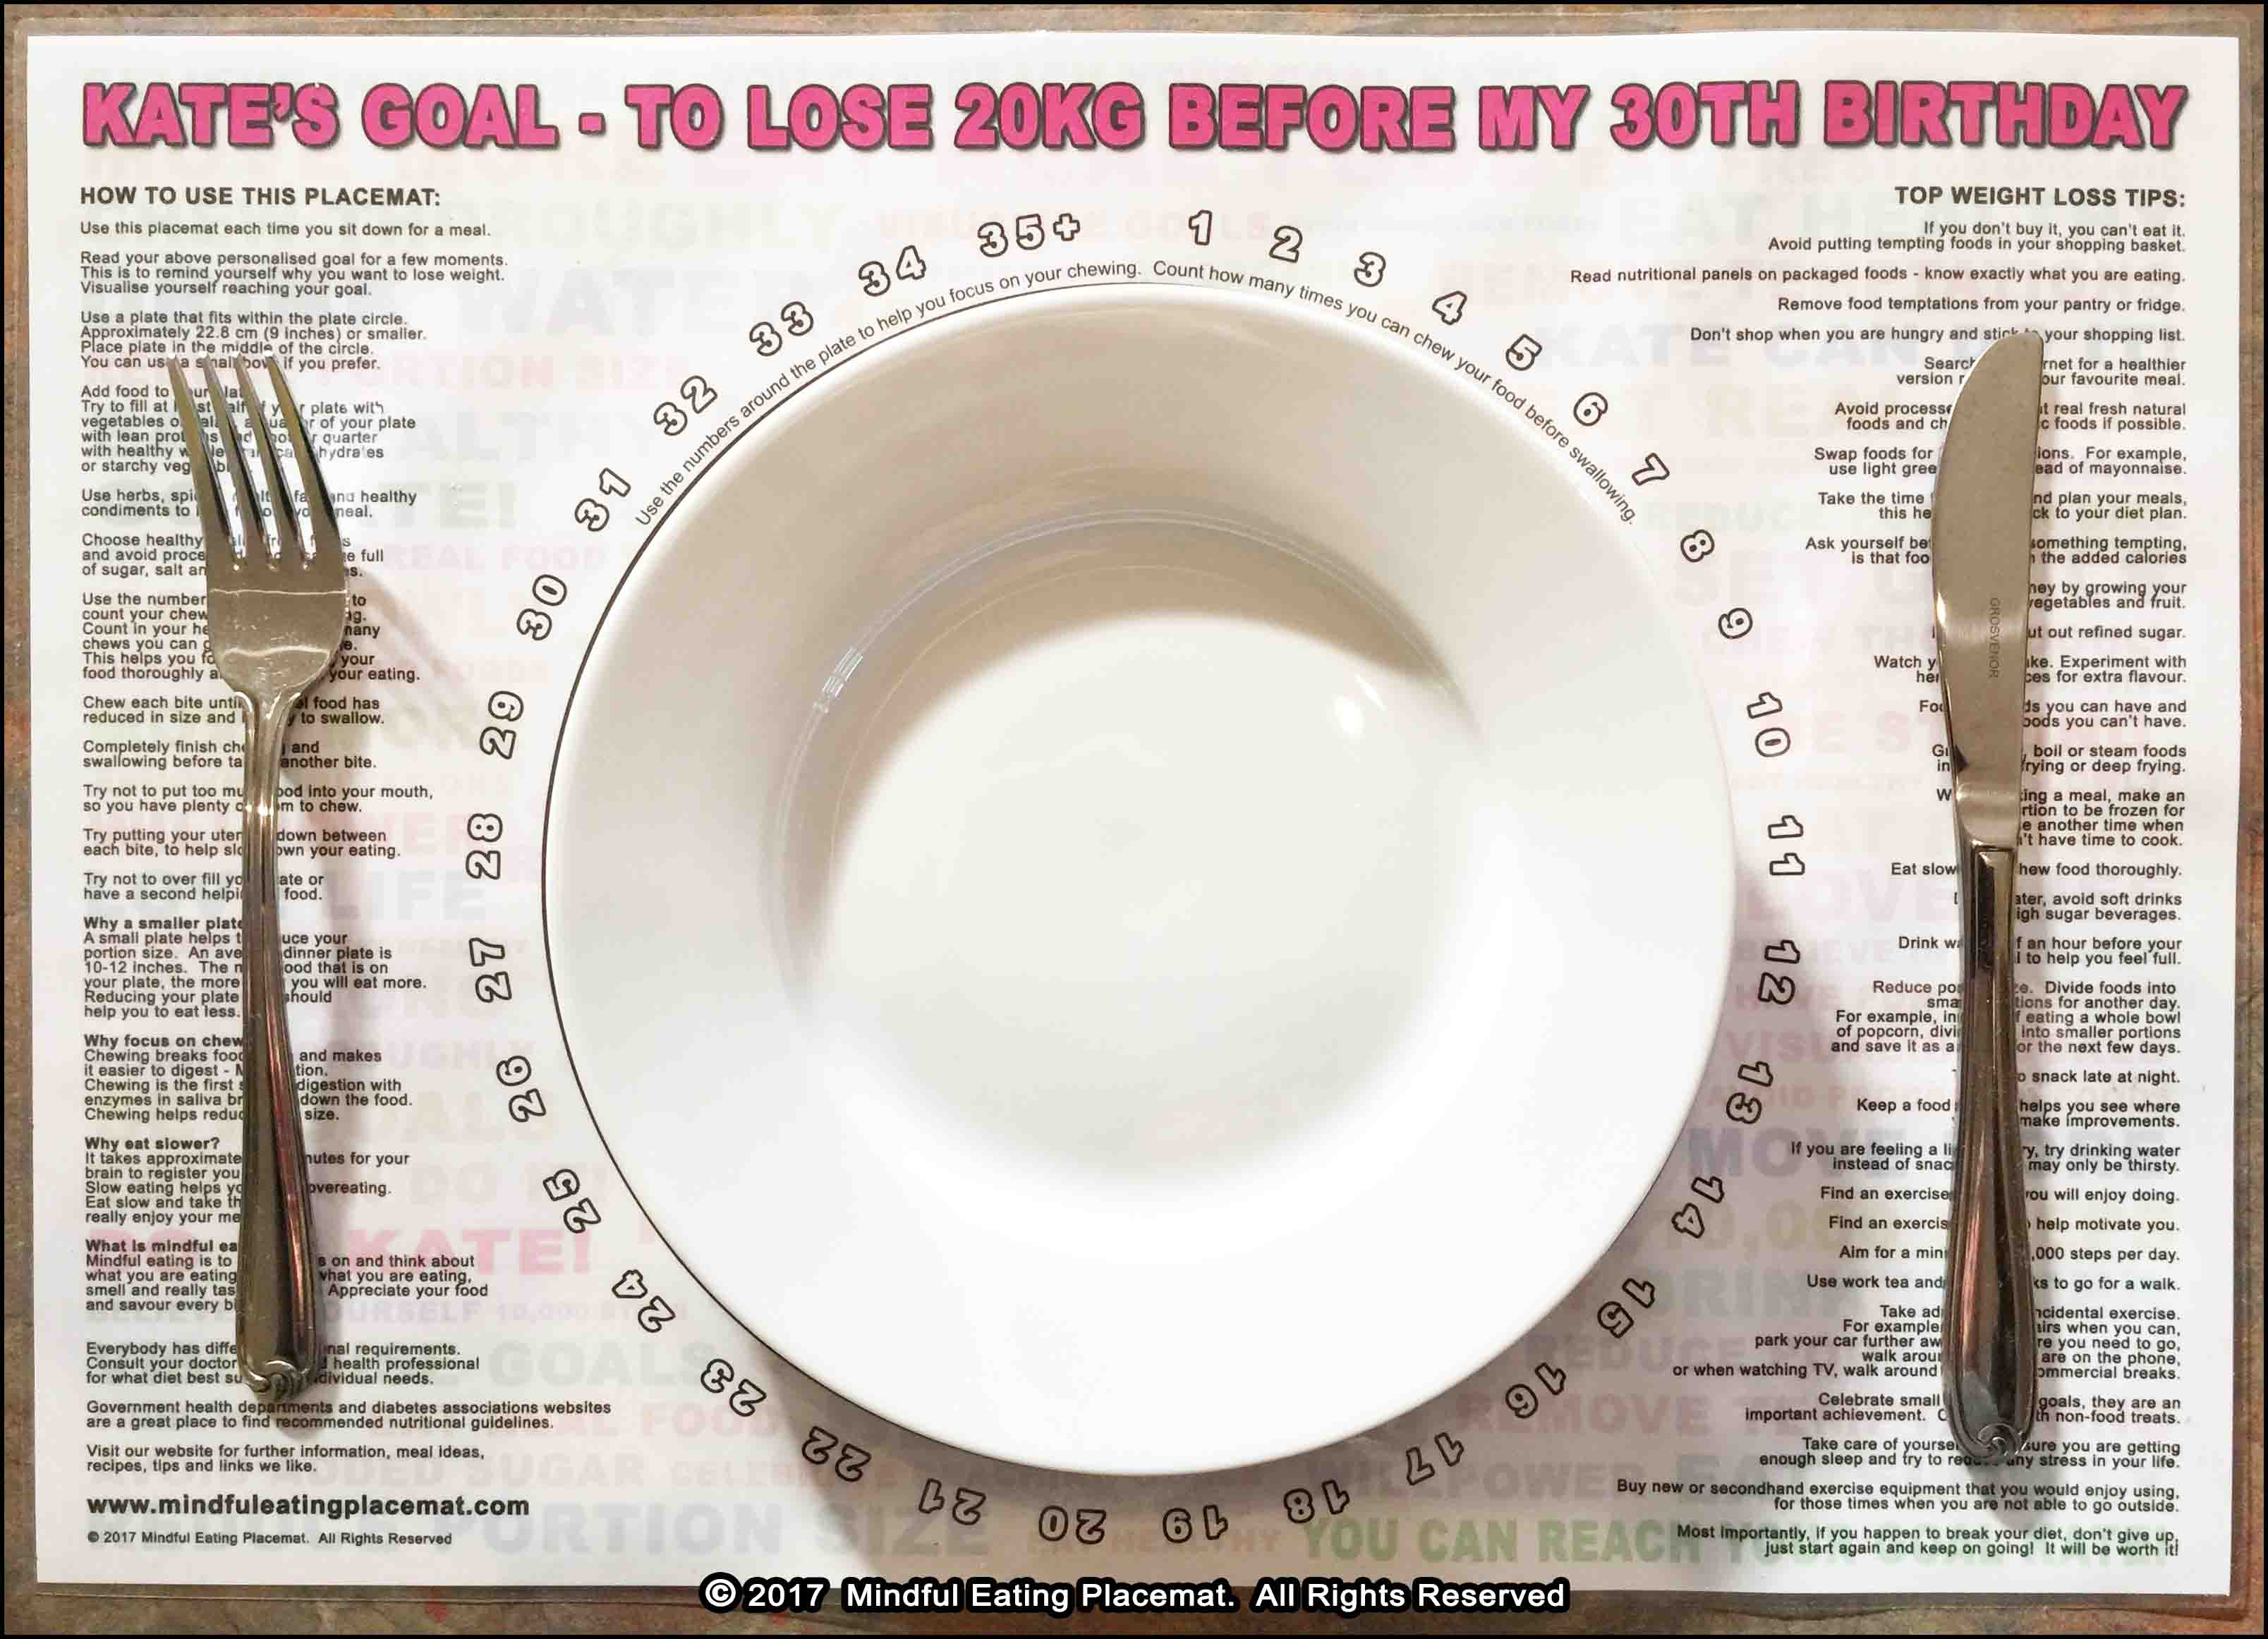 Place your plate in the middle of the placemat circle